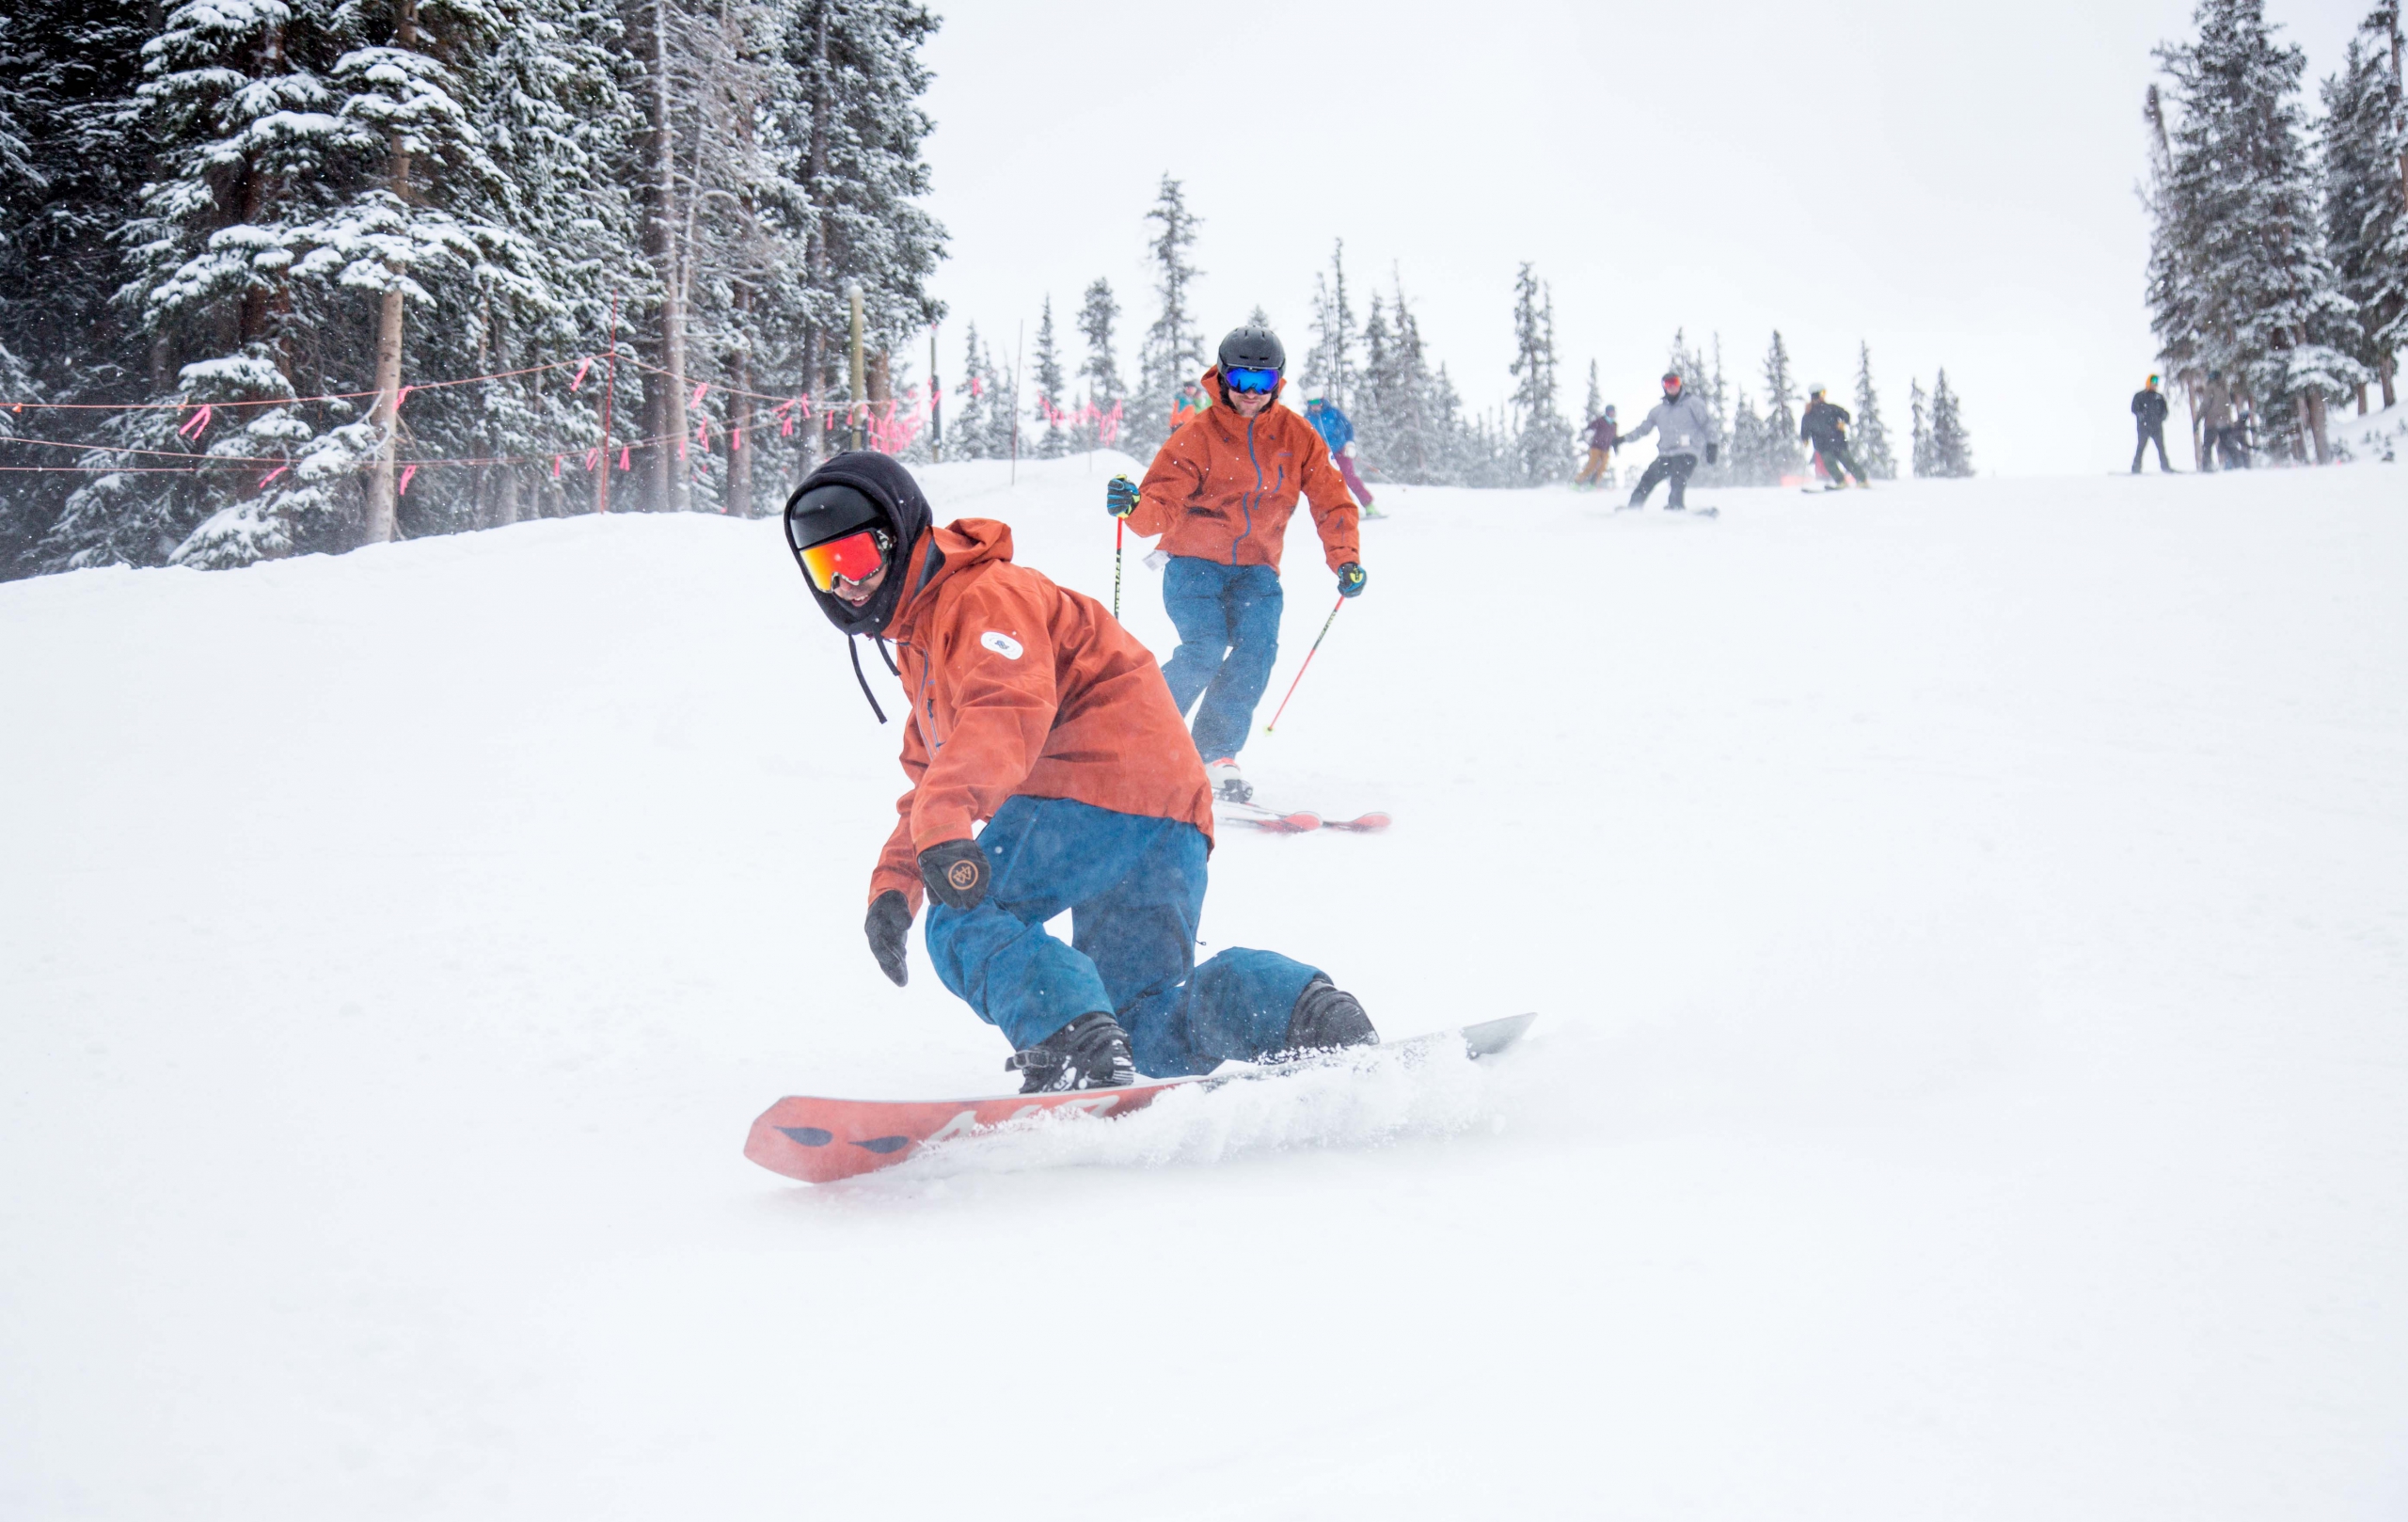 PSIA-AASI National Team members snowboard and ski down the slope at A-Basin